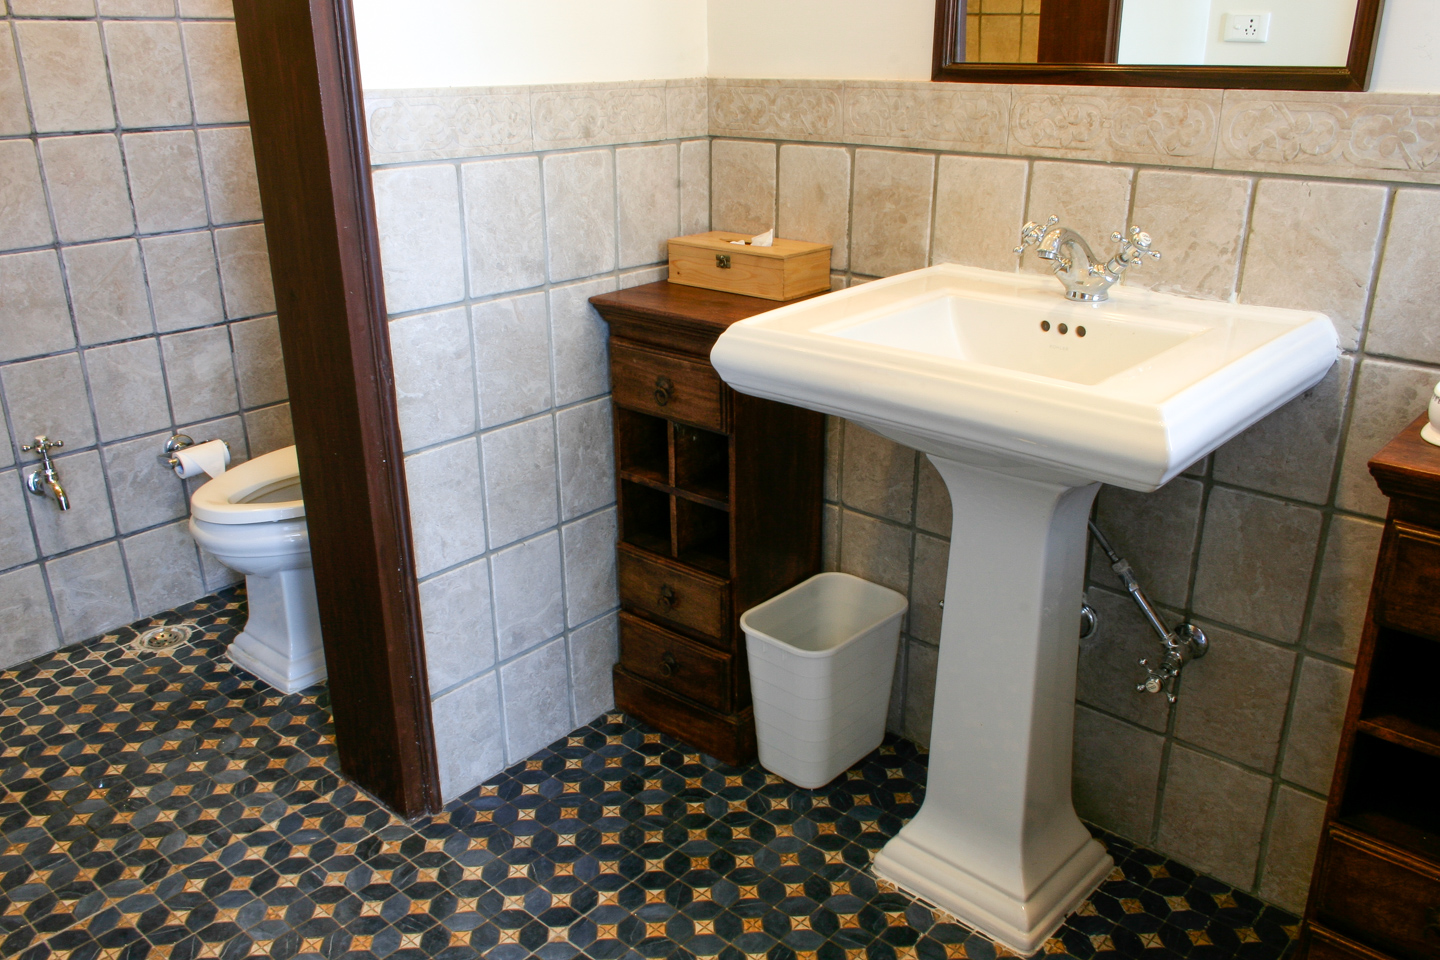 The powder room attached to the conference room is paved with period tiles and has aged stone on the walls.